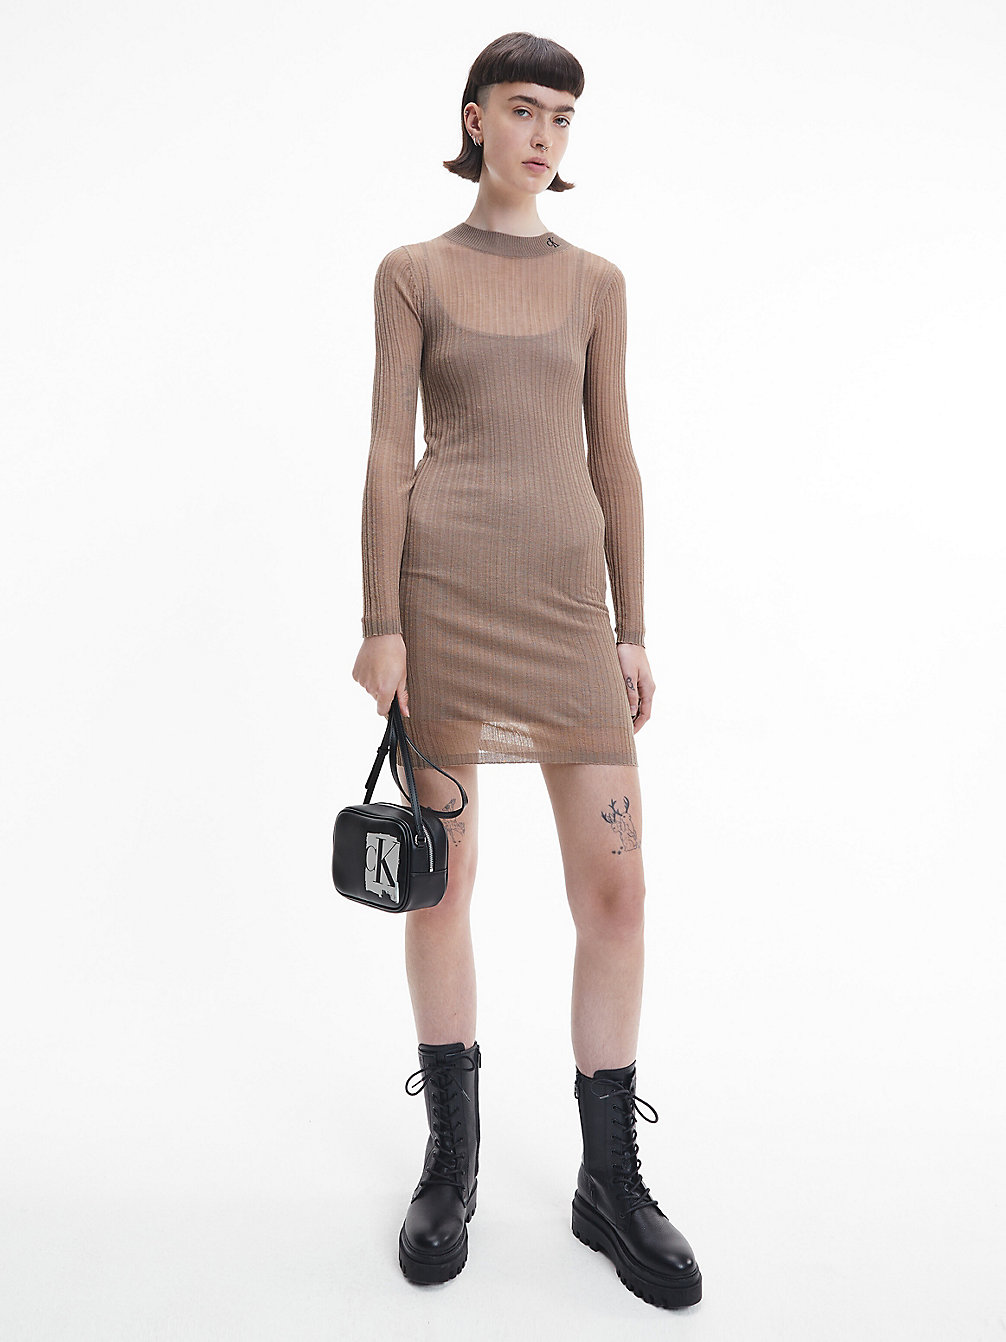 PERFECT TAUPE Sheer Knit Double Layer Midi Dress undefined women Calvin Klein